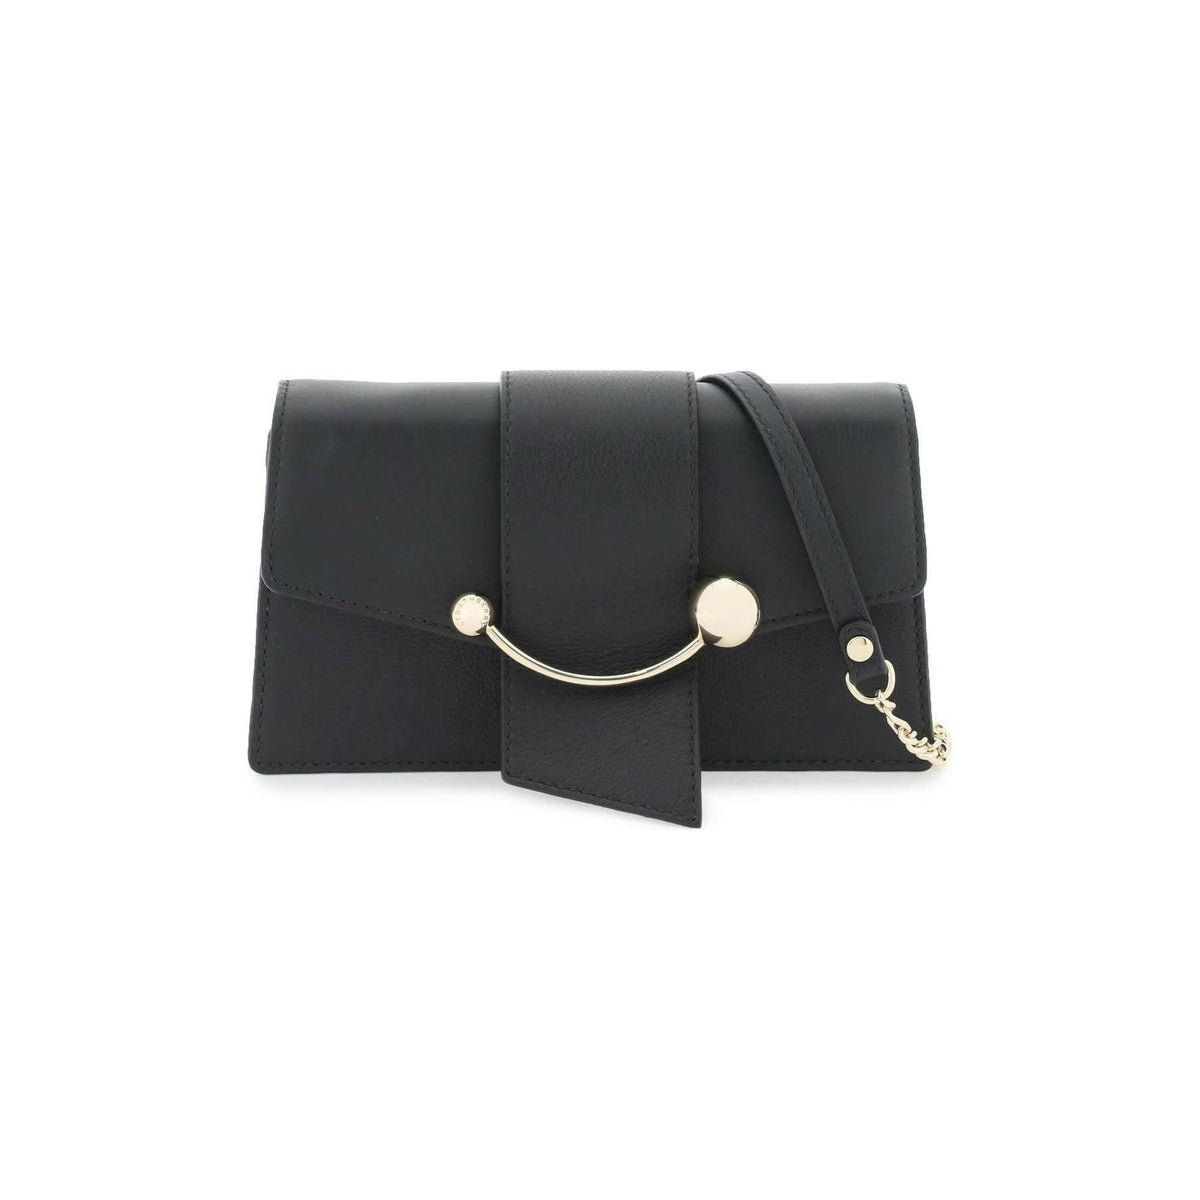 Black 'Crescent On A Chain' Leather Bag STRATHBERRY JOHN JULIA.